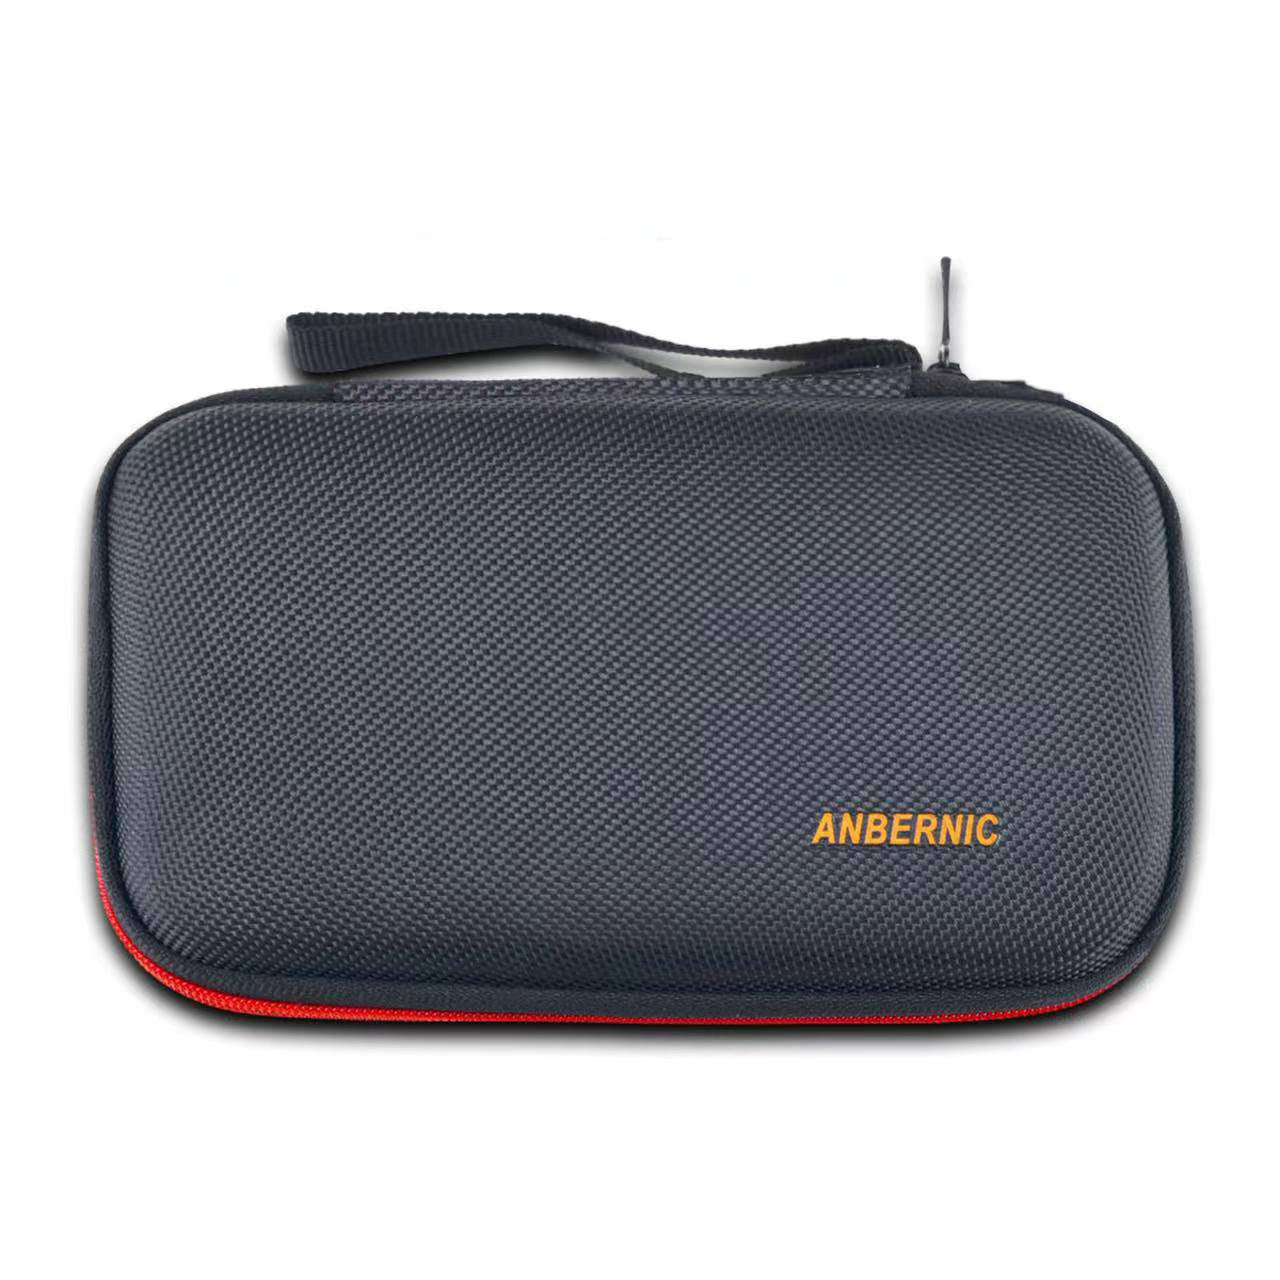 ANBERNIC RG350/RG350M/RG350P Protection Bag and parts for Retro Game C